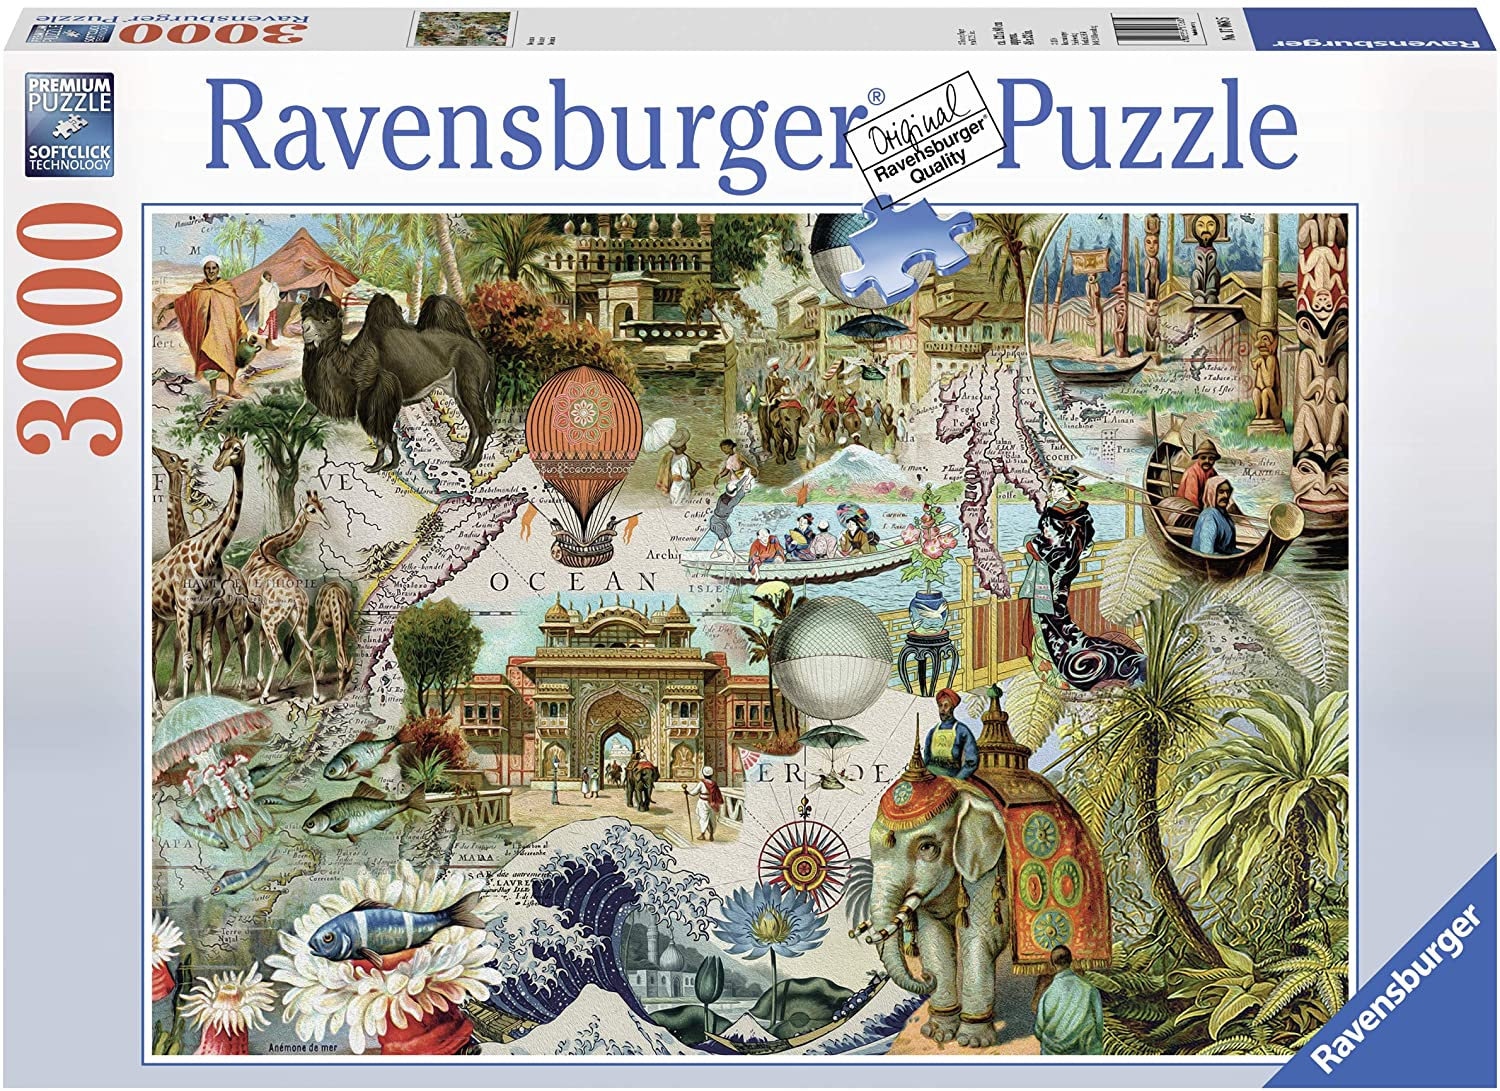 Ravensburger Oceania 3000 Piece Puzzle Brand New Sealed -  Hong Kong